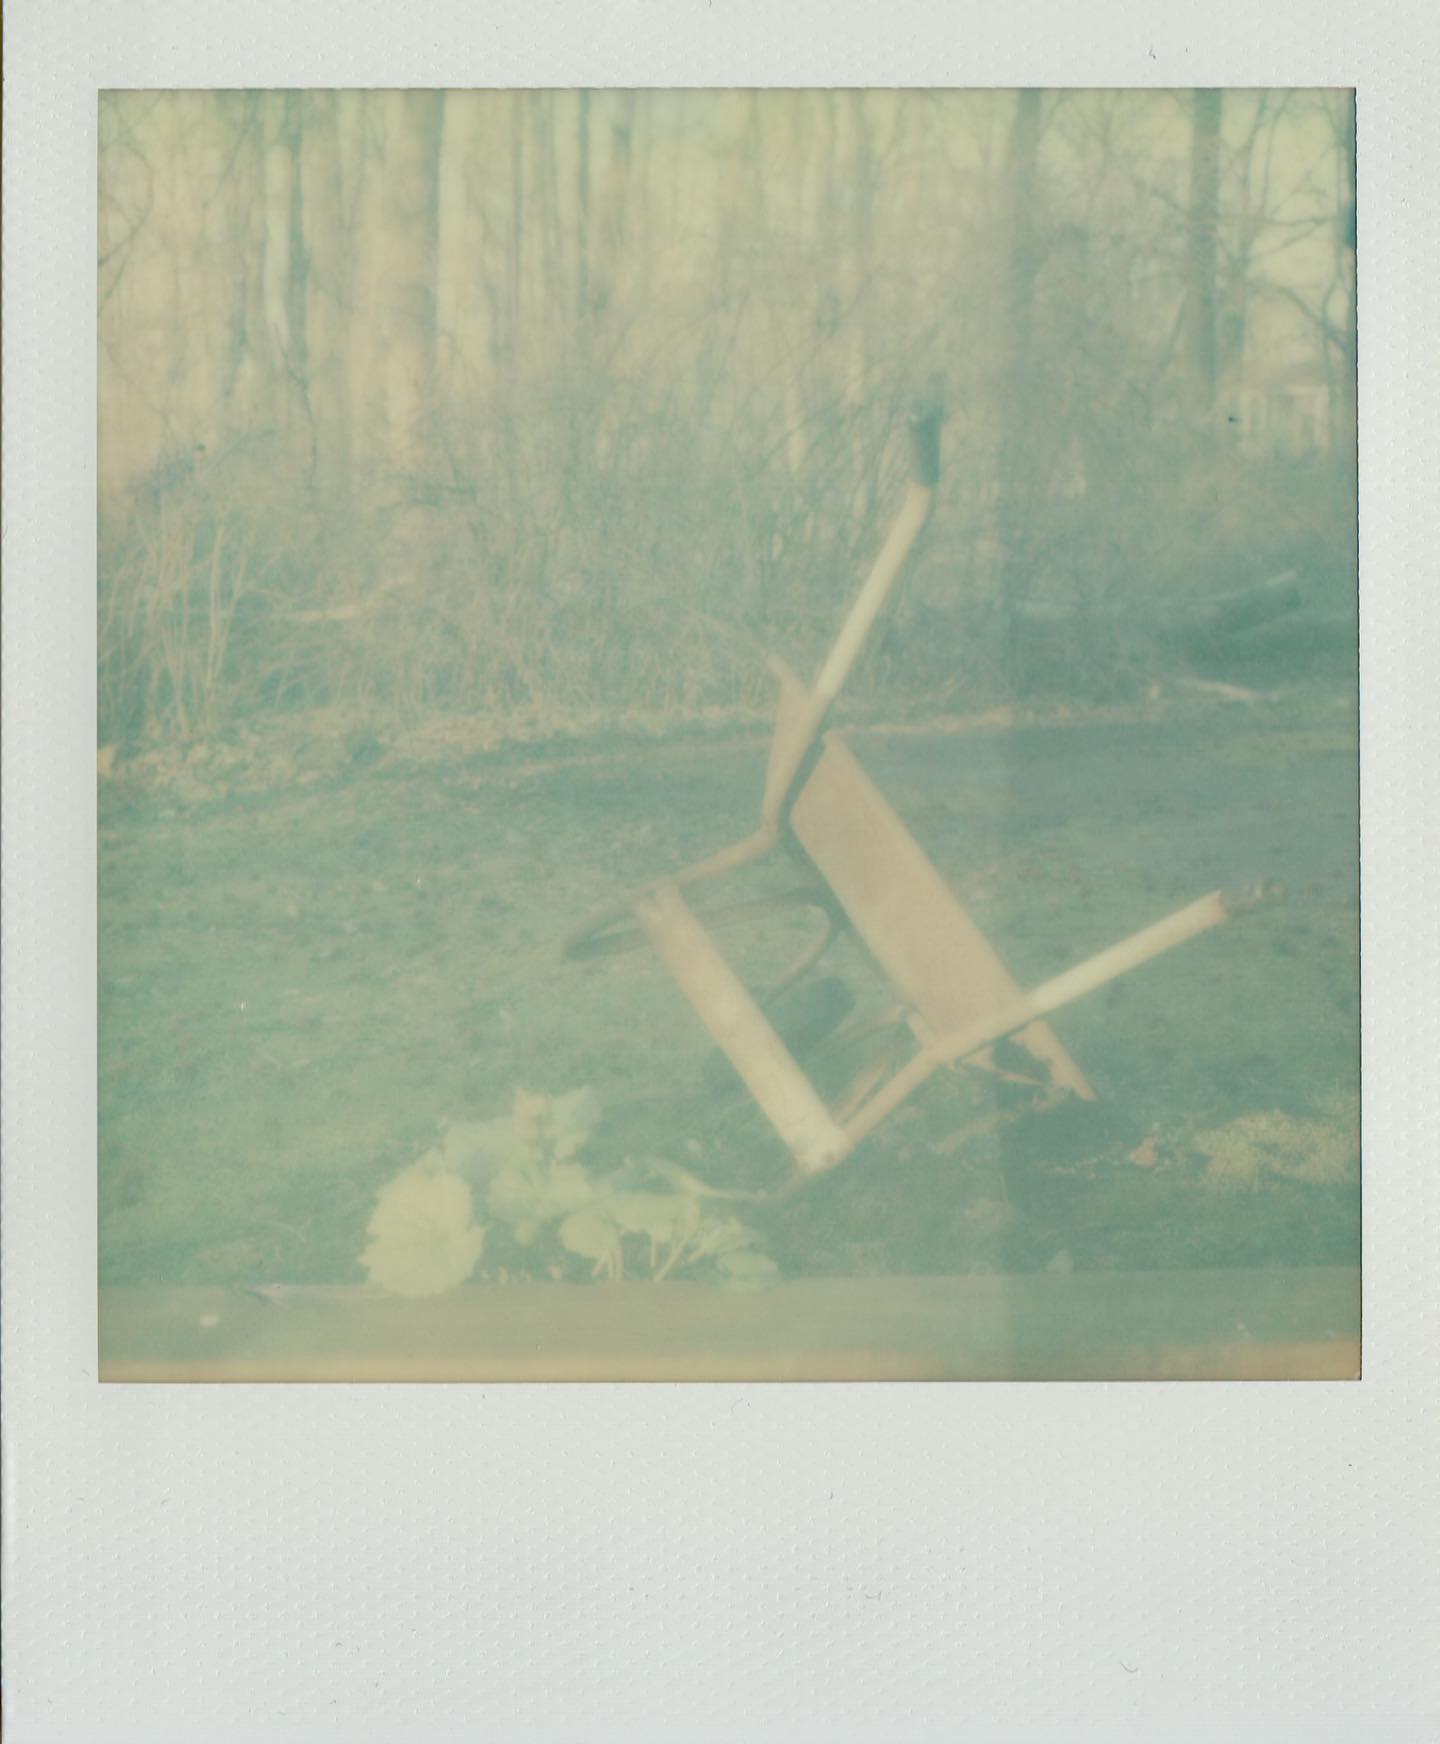 Wheelbarrow 
Shot on long-expired (05-2016) Impossible Project Pioneer film 600 Color GEN 2 with my @mintcamera SLR-670S. Shooting a lot around the house and yard during these #quarantinedays #polaroid #impossibleproject #impossibleprojectfilmbeta #impossibleprojectfilm #film #filmphotography